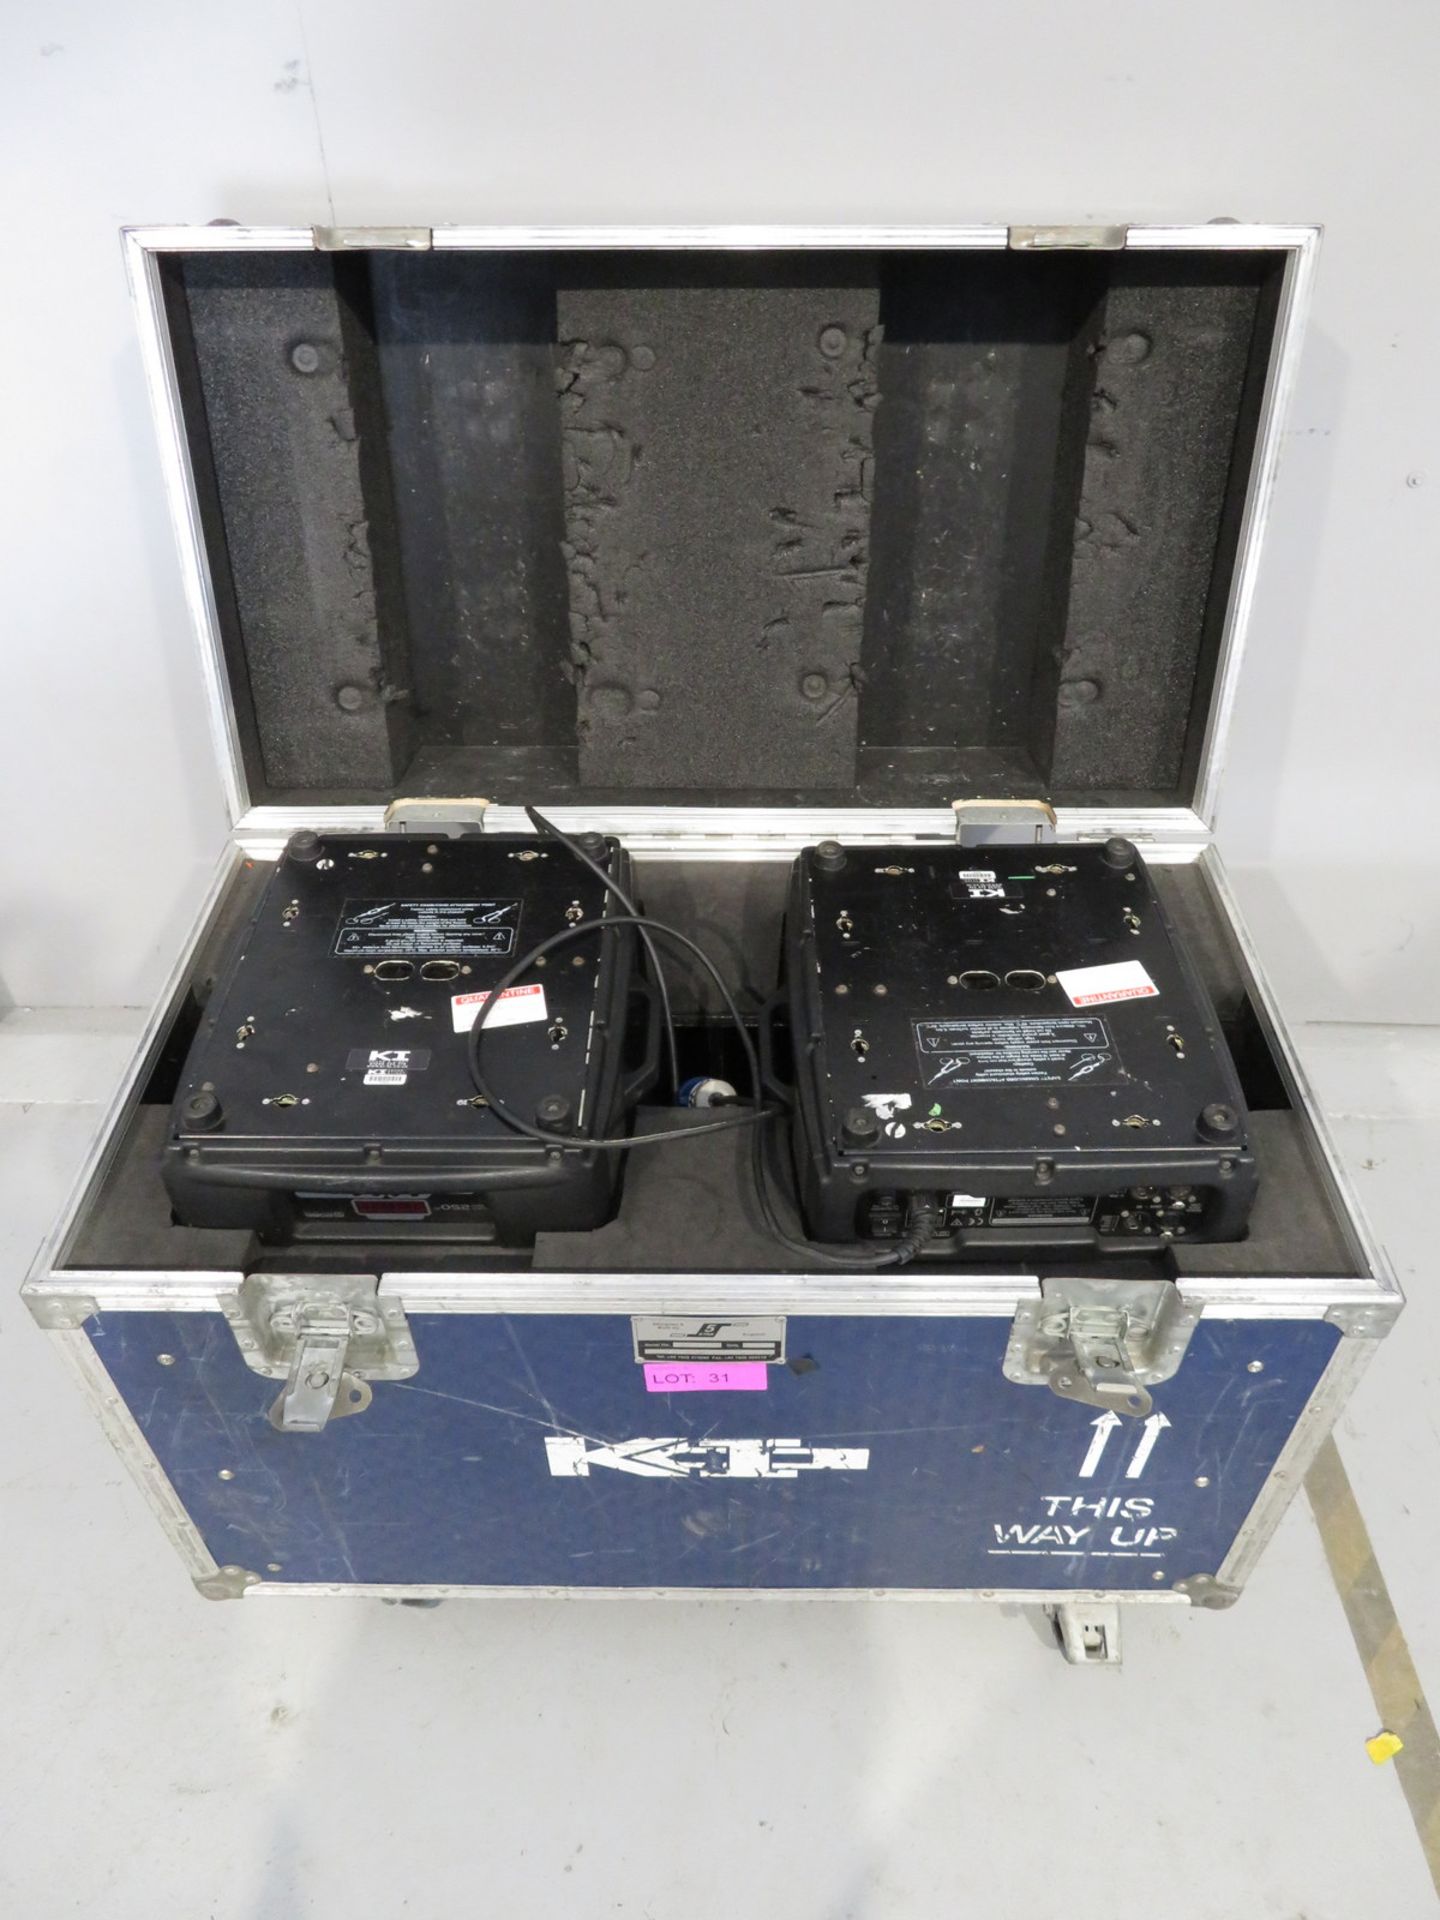 Pair of Robe Colourspot 250 AT Series in flightcase. Includes hanging clamps. Faulty. Hou - Image 8 of 9